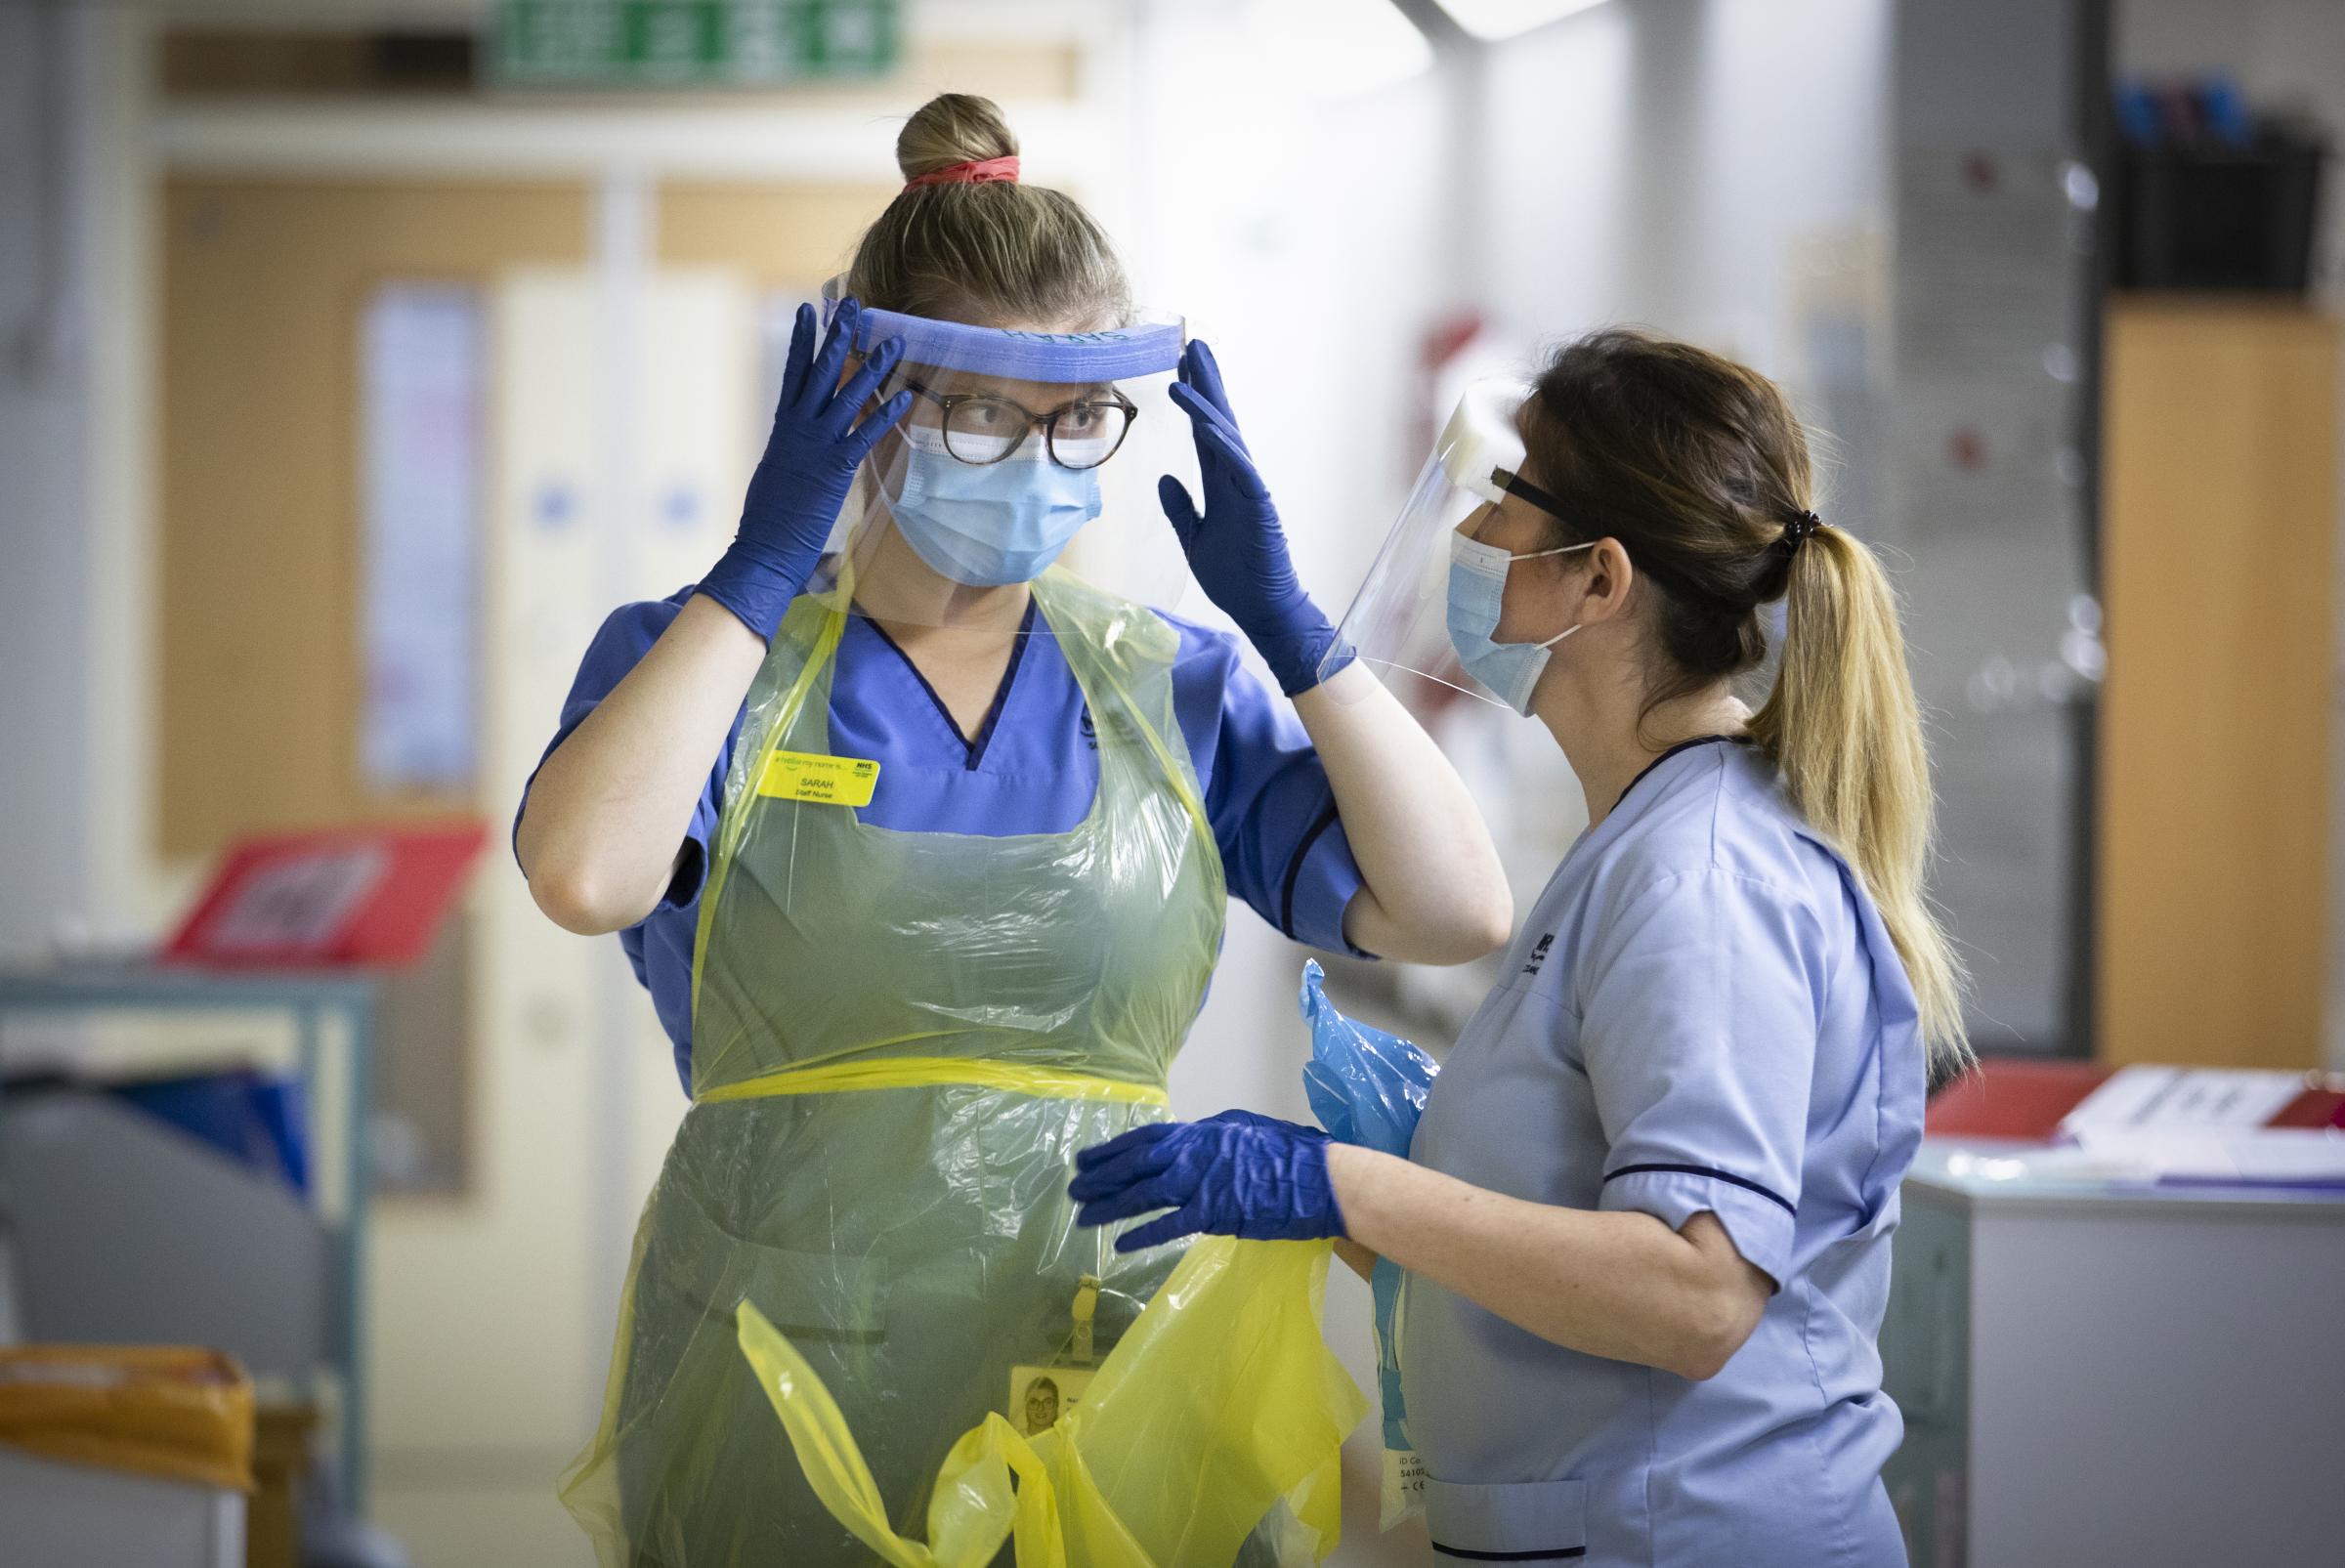 Audit Scotland report reveals truths about PPE in early stages of pandemic